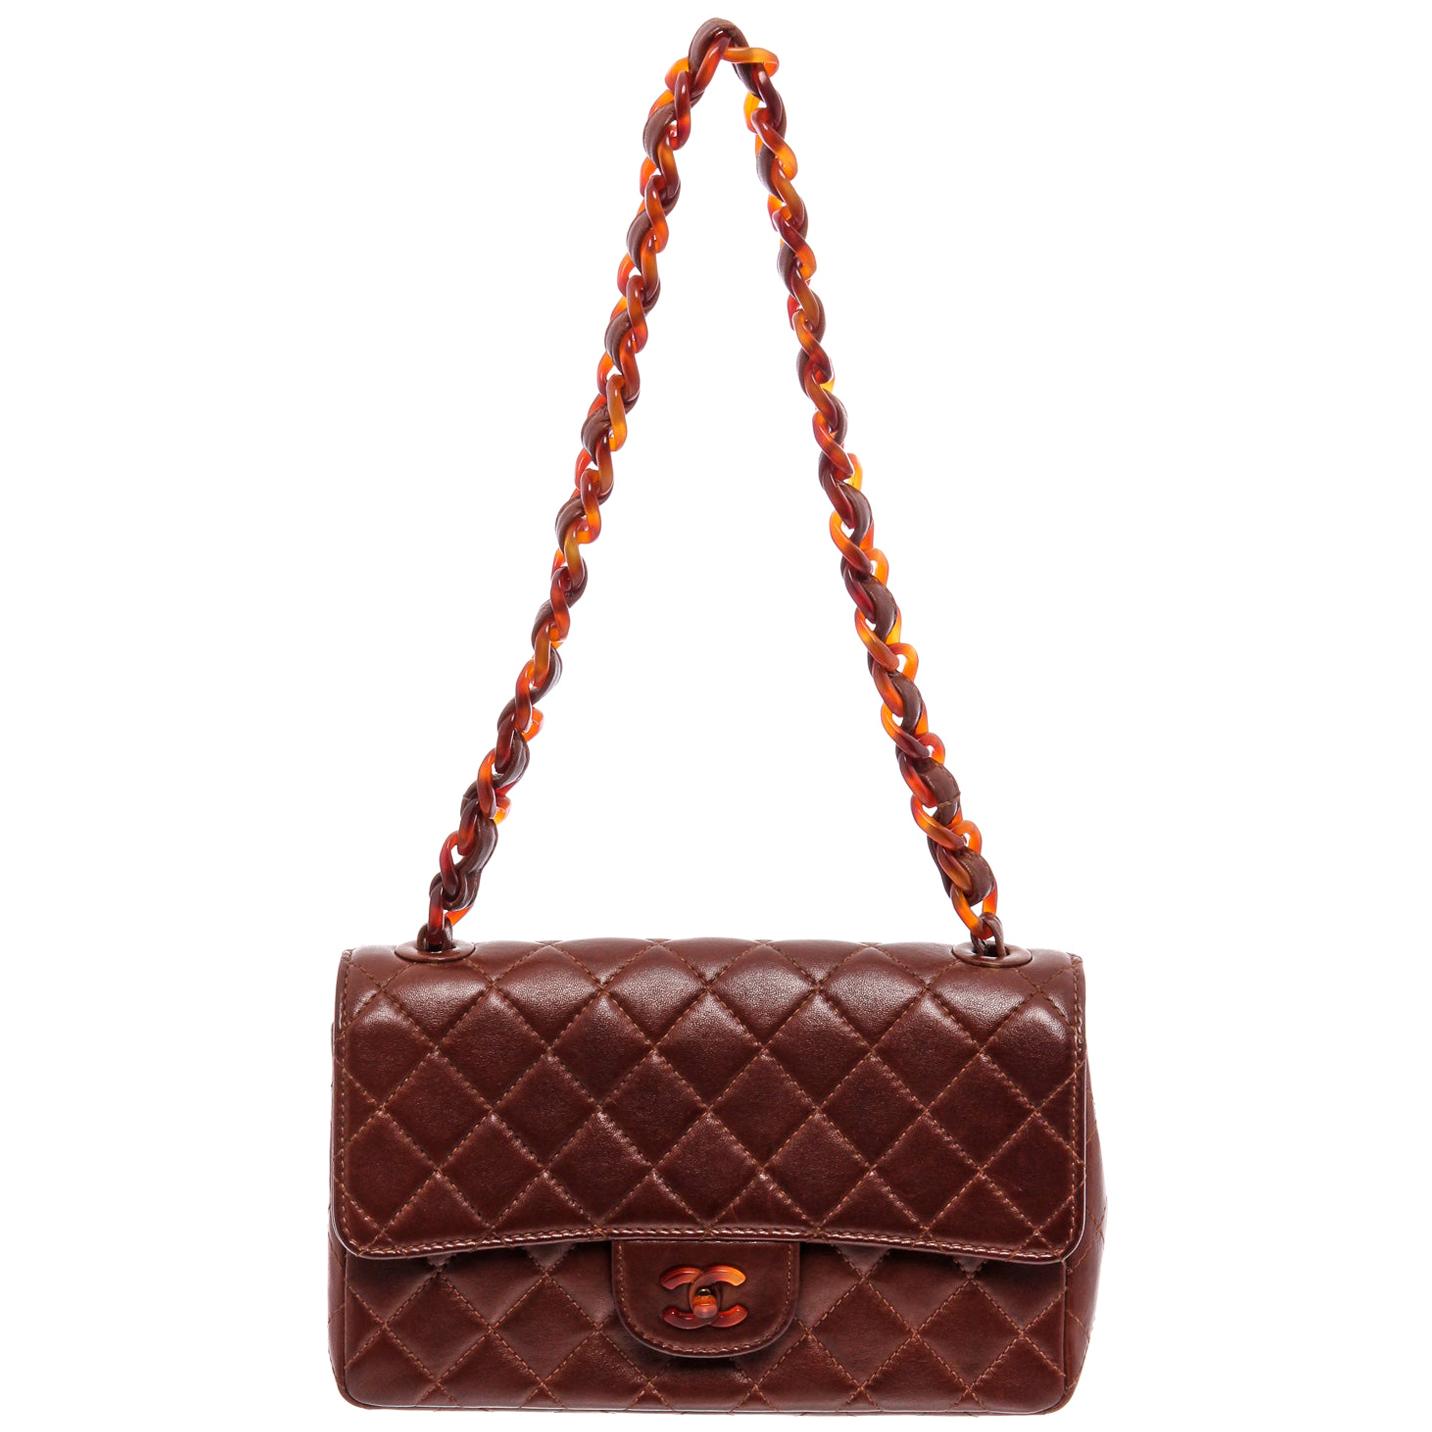 CHANEL/Tote Bag/Lambskin/RED/vintage tortoise shell braid – 2nd